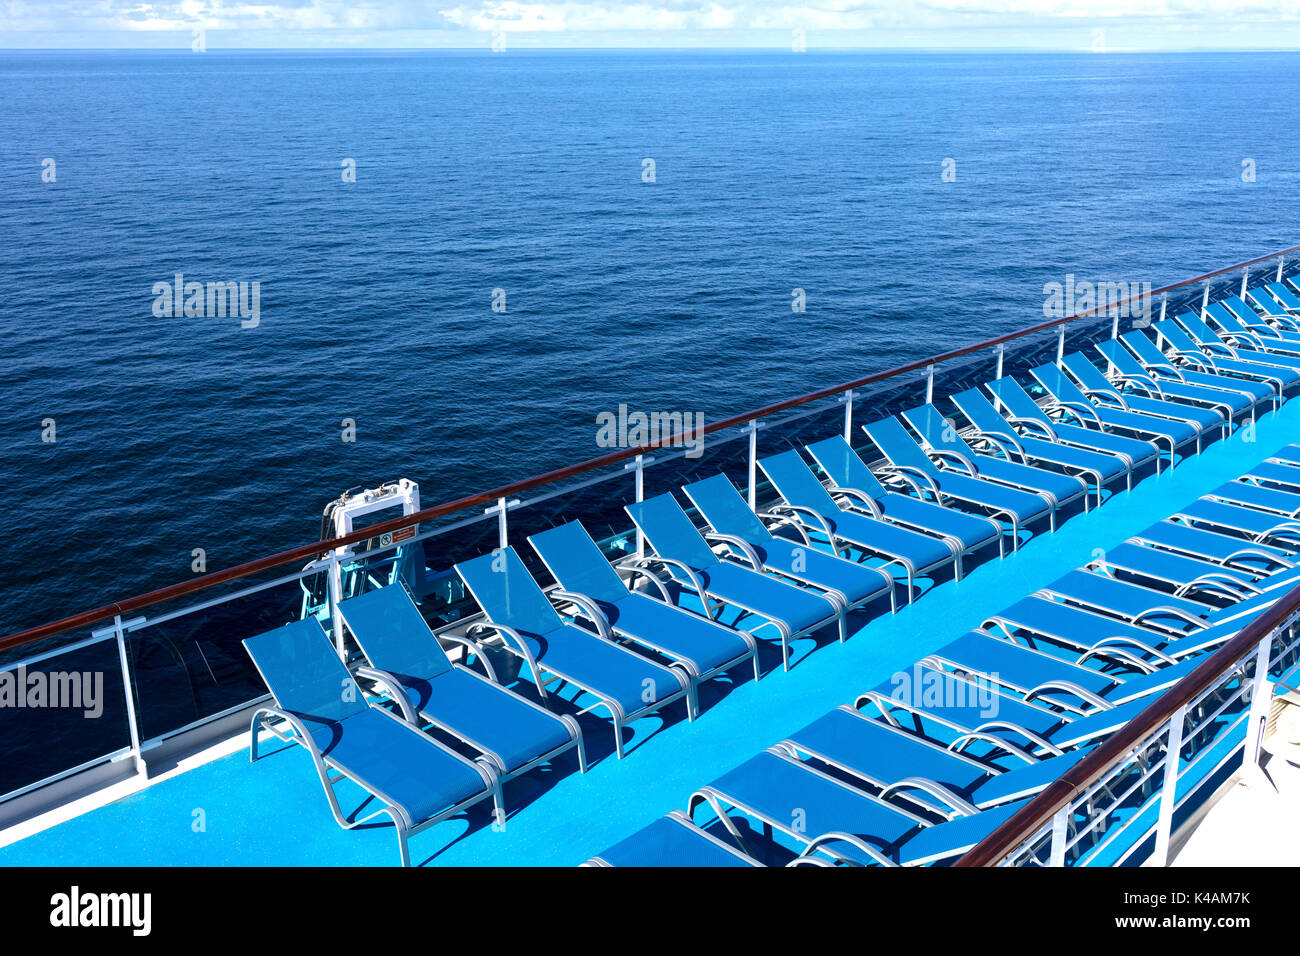 blue loungers on the deck of a transatlantic with the ocean background Stock Photo